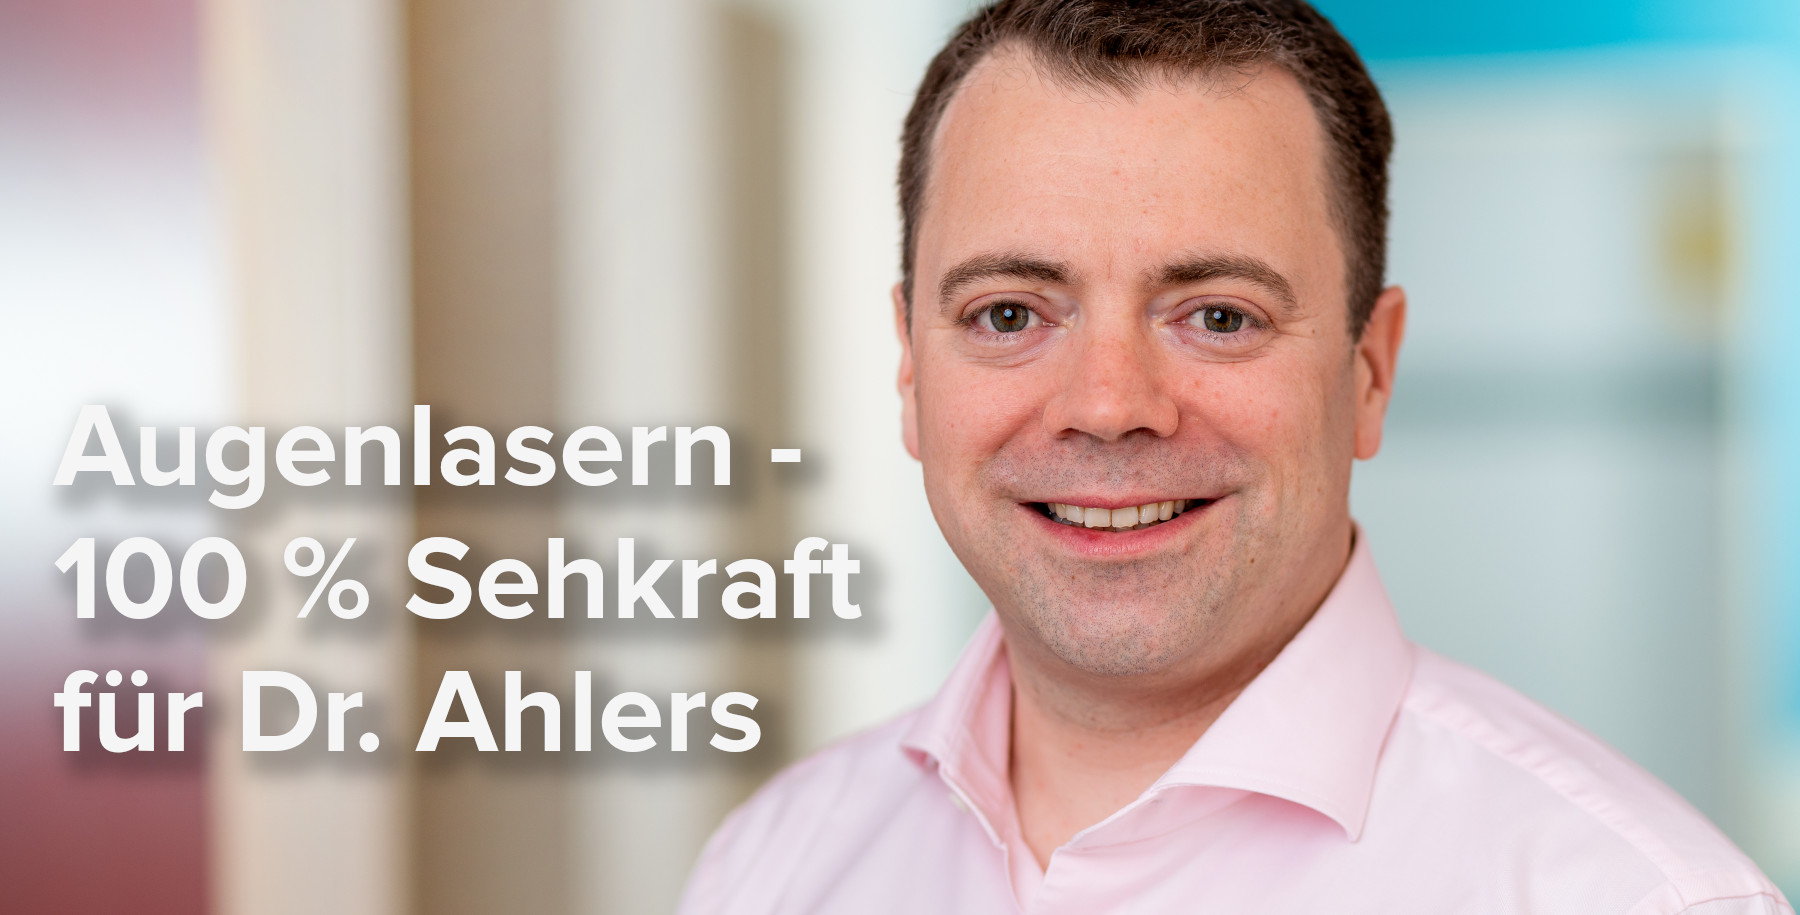 Dr. Ahlers hat 100 Prozent Sehkraft ohne Brille